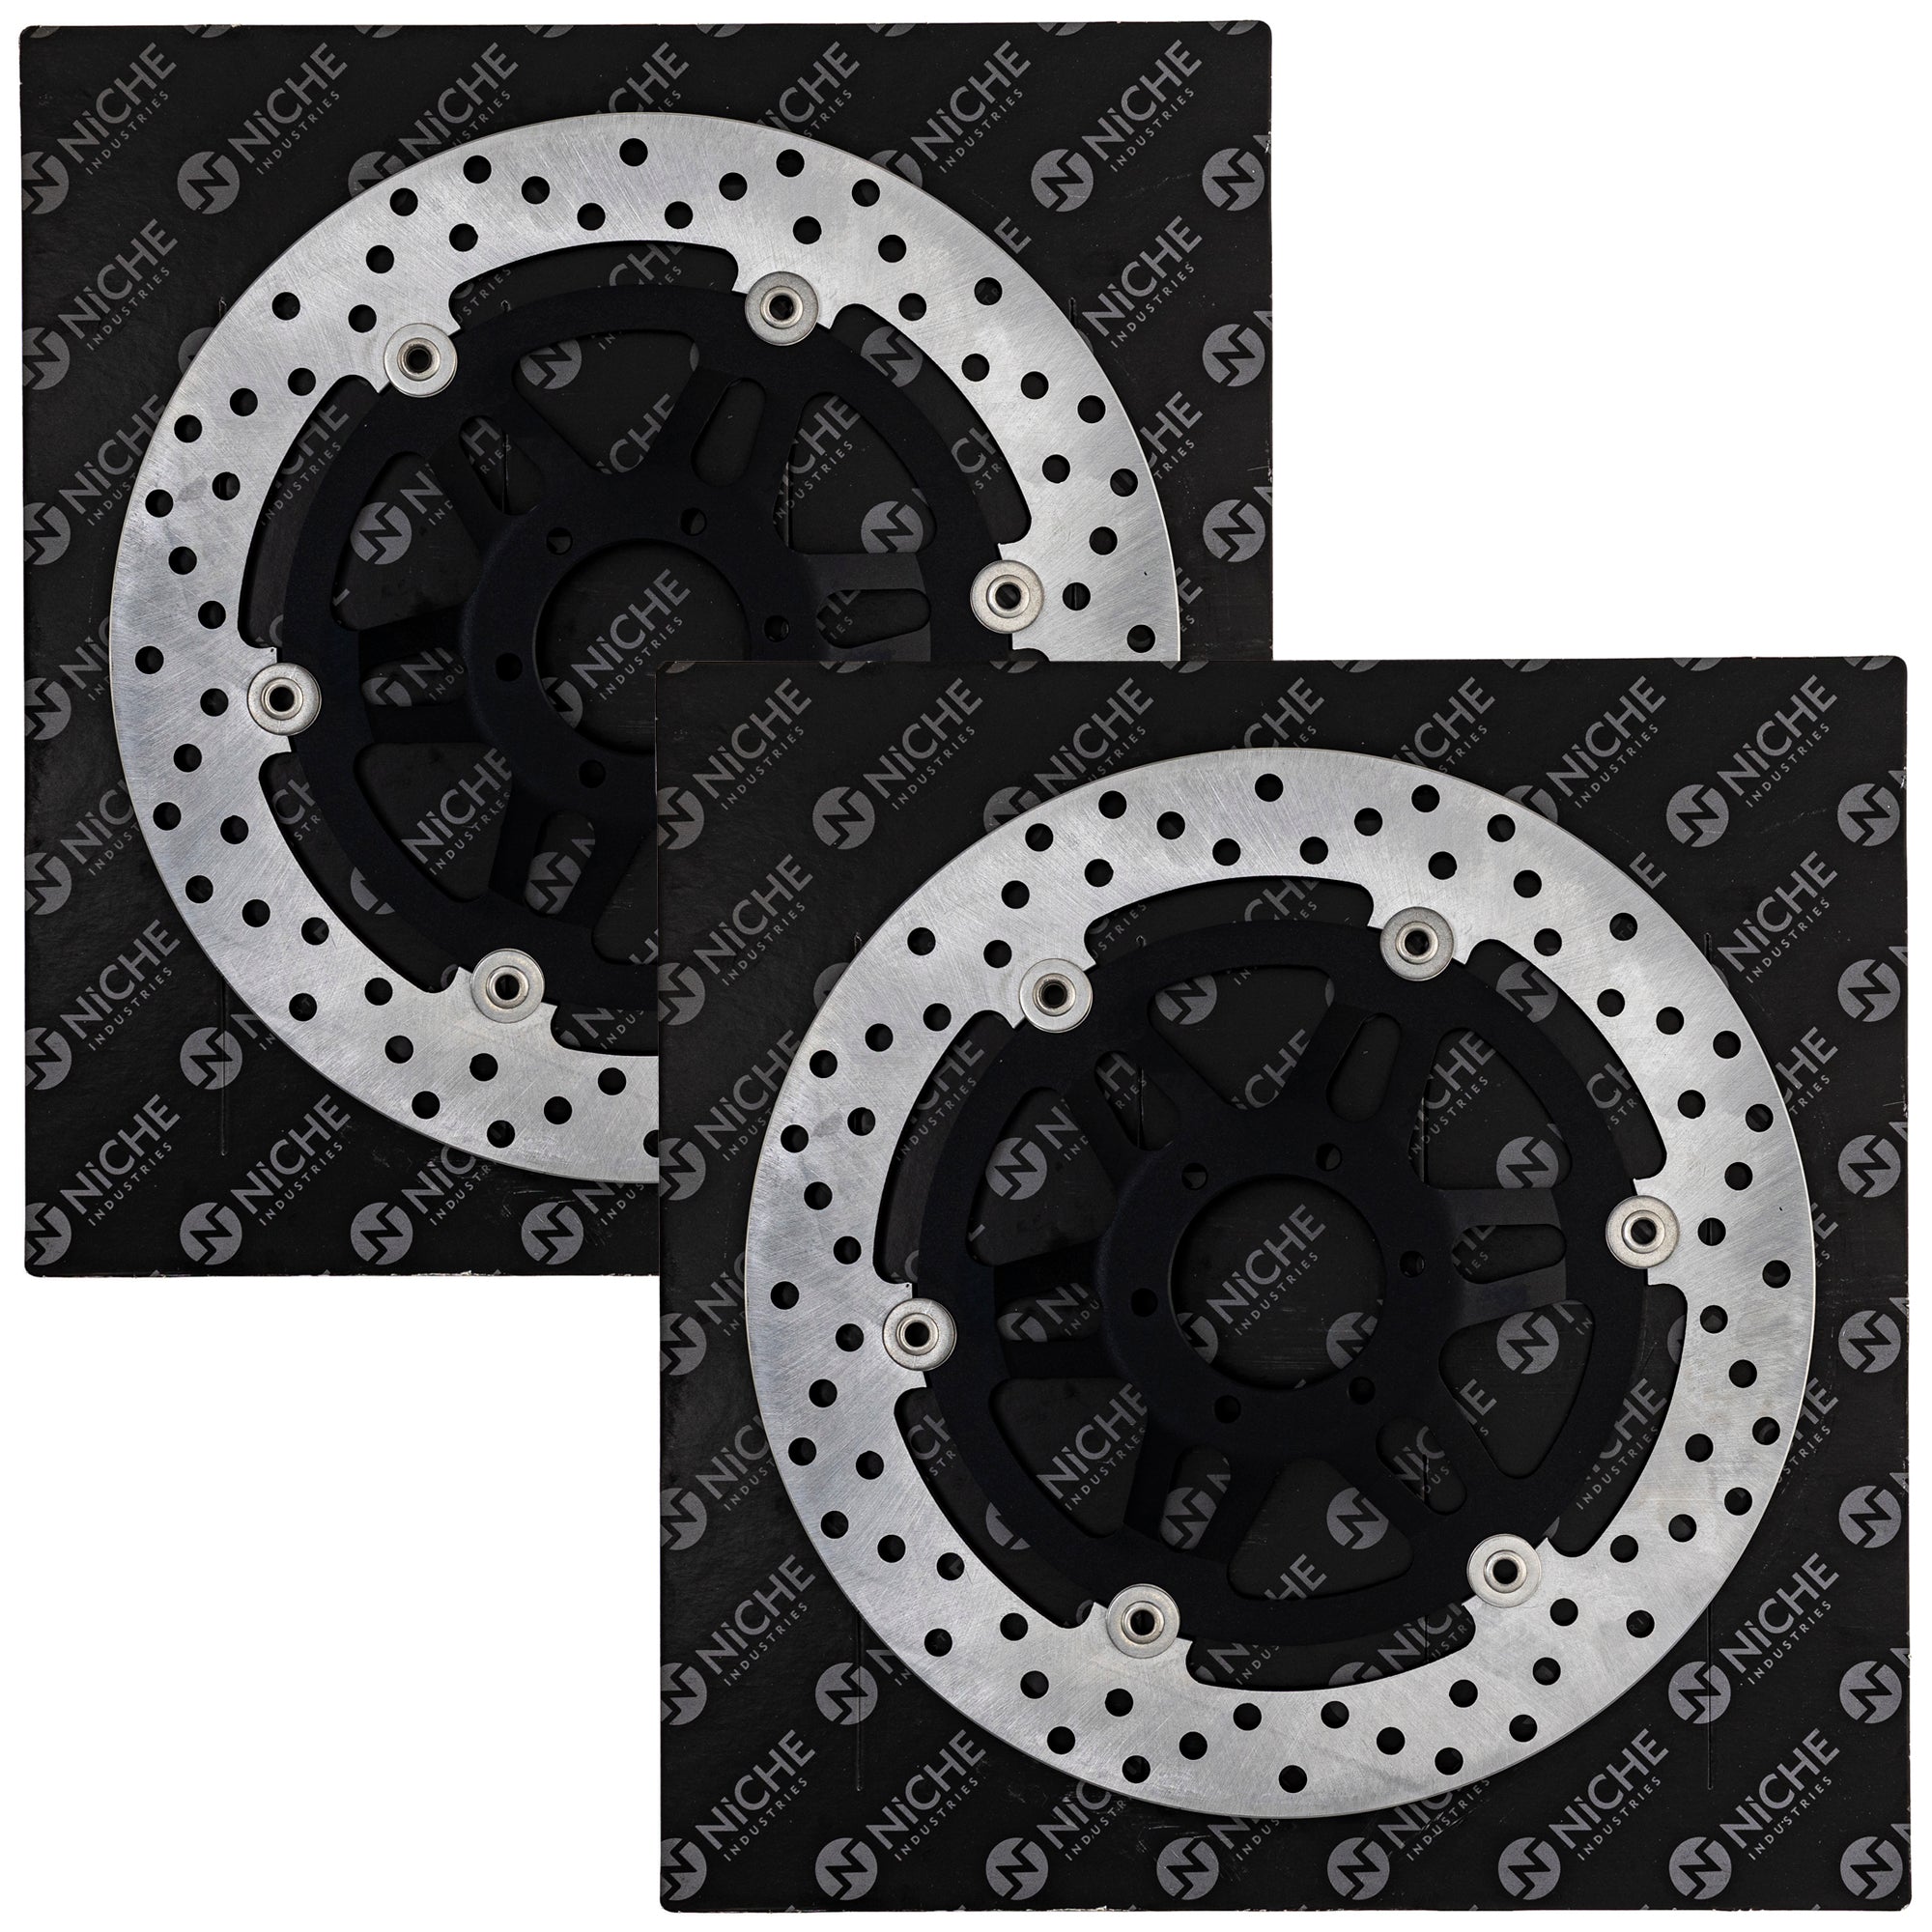 NICHE 519-CRT2209R Front Brake Rotor 2-Pack for zOTHER Z1000 Ninja